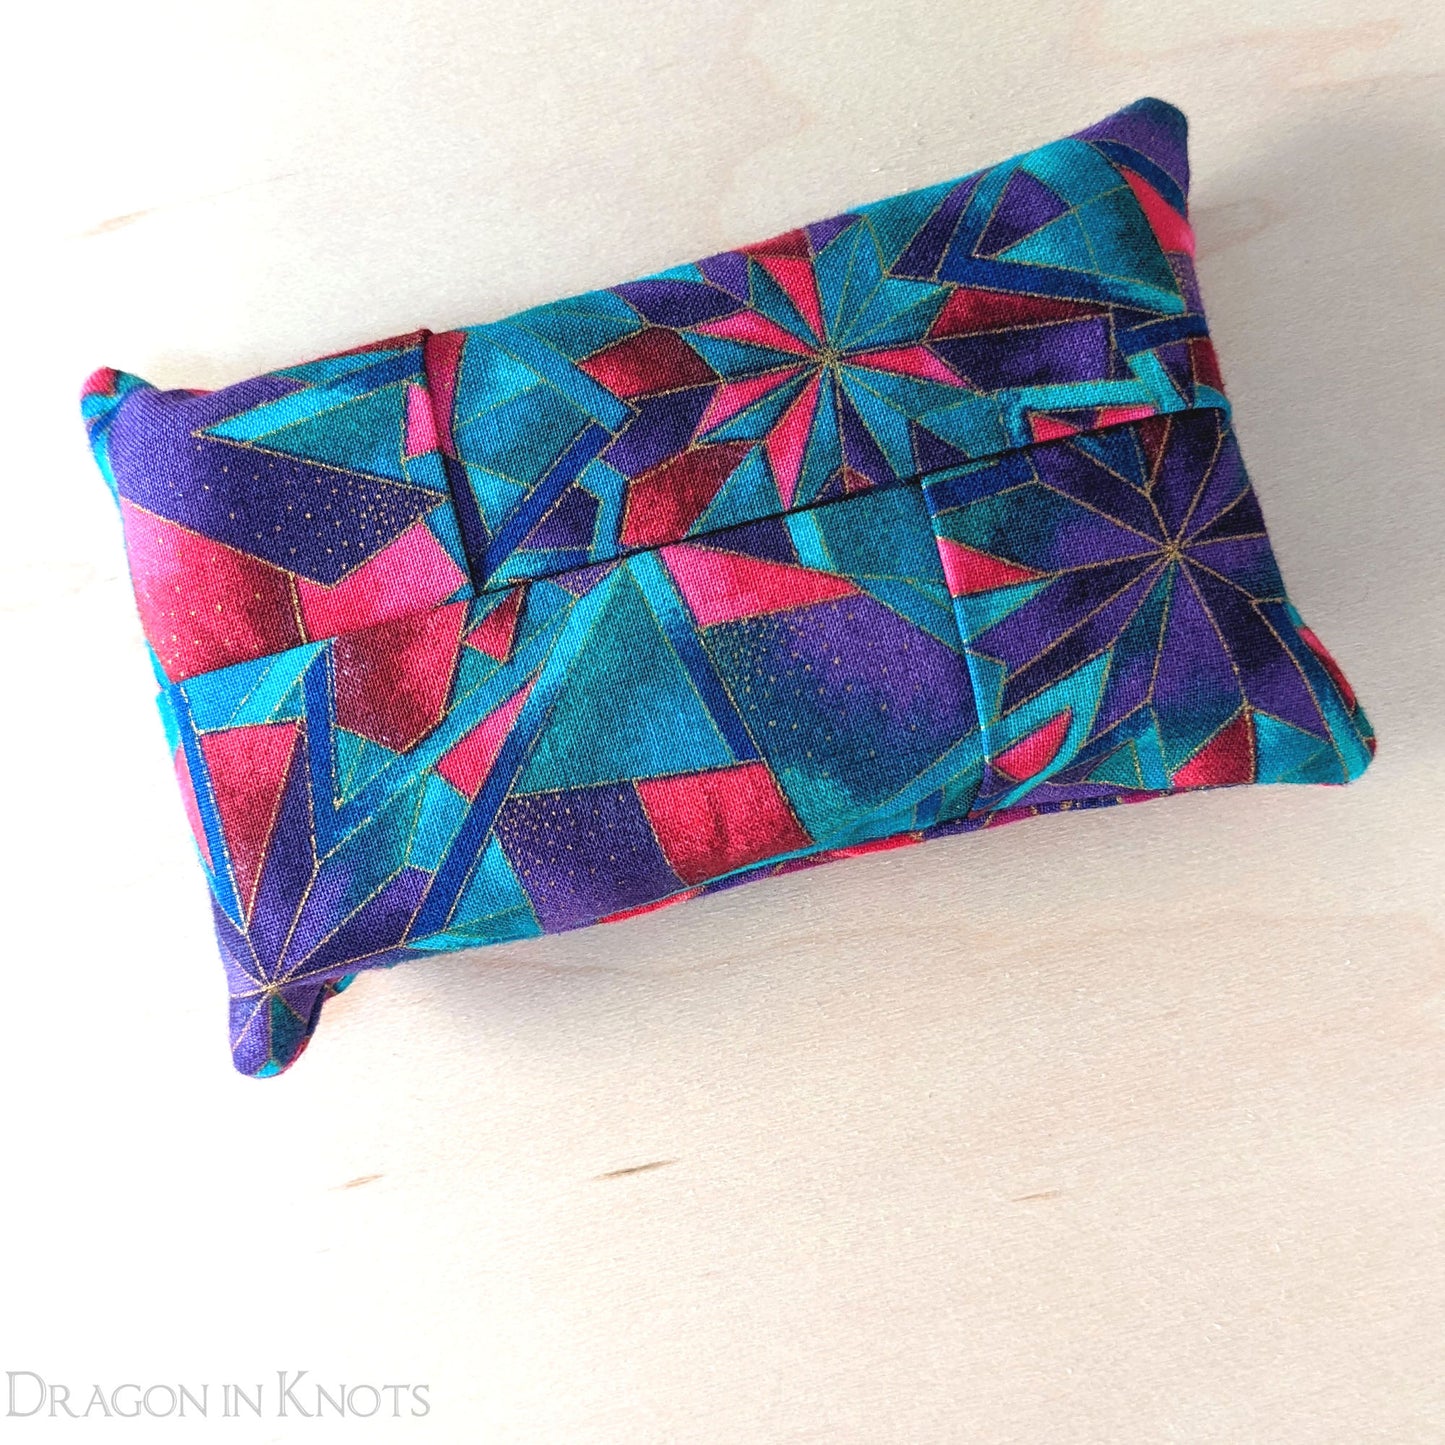 Jewel-tone To-Go Tissue Cover - Dragon in Knots handmade